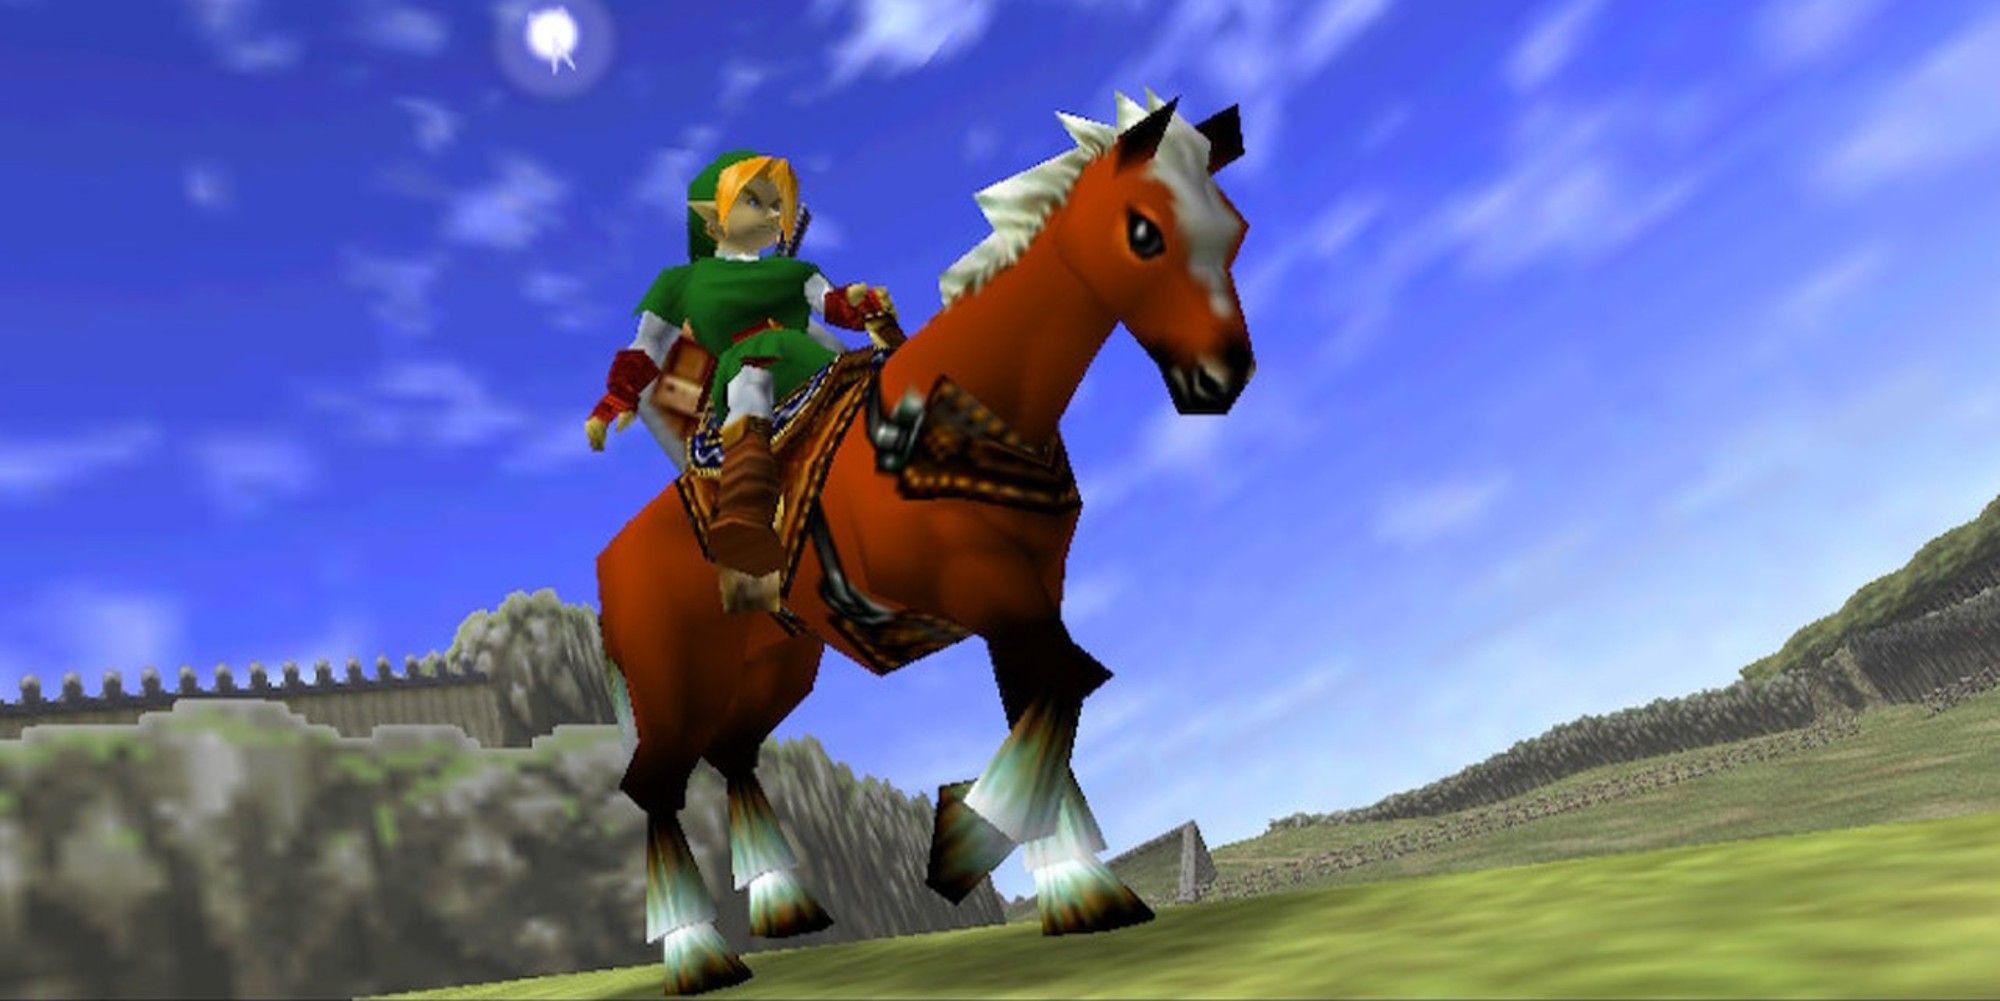 link riding a horse in ocarina of time